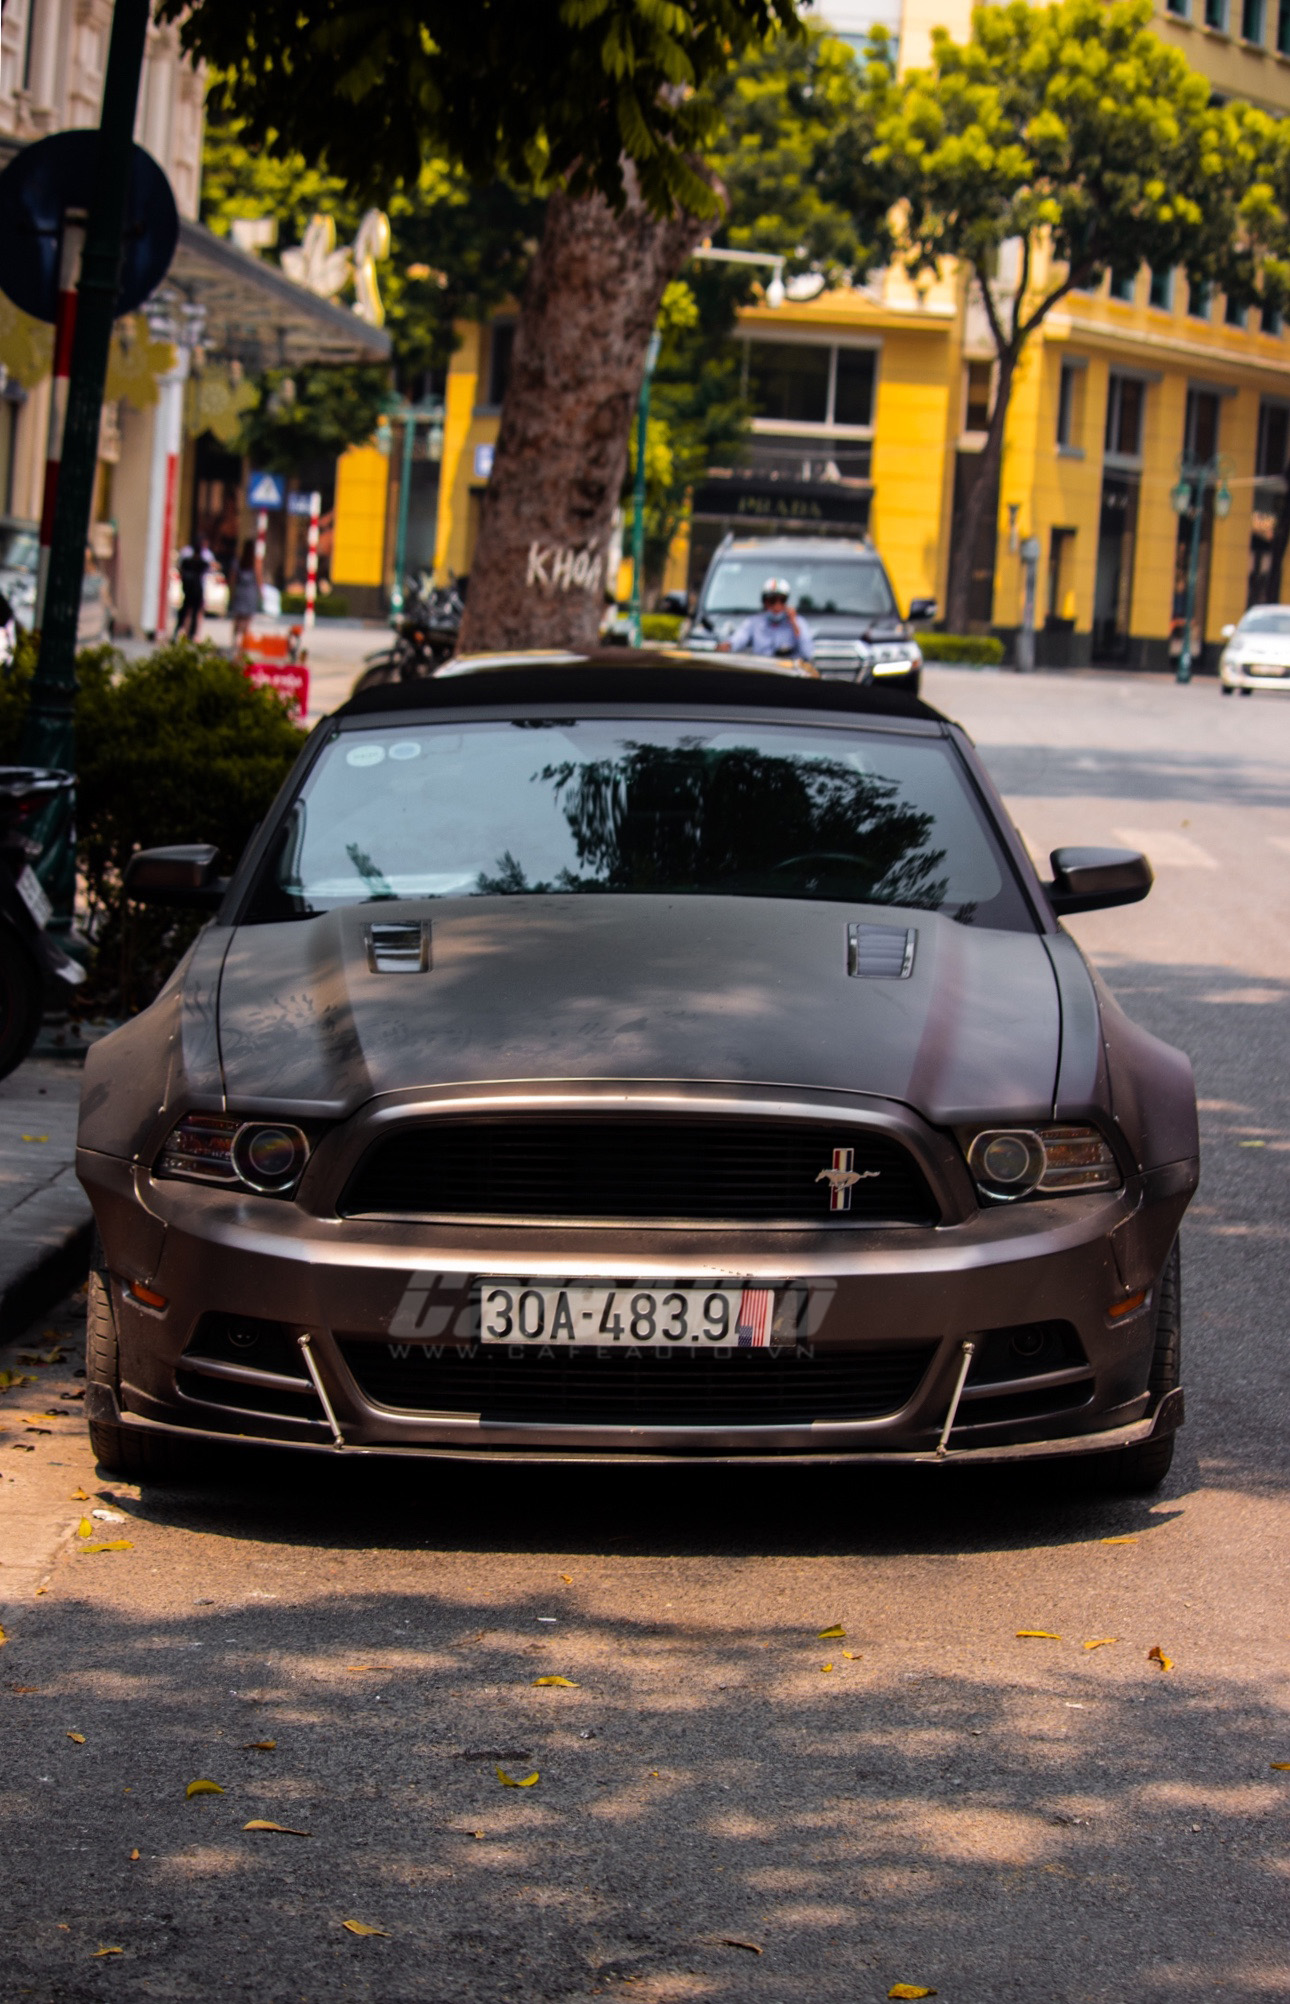 mustangGT-cafeautovn-3